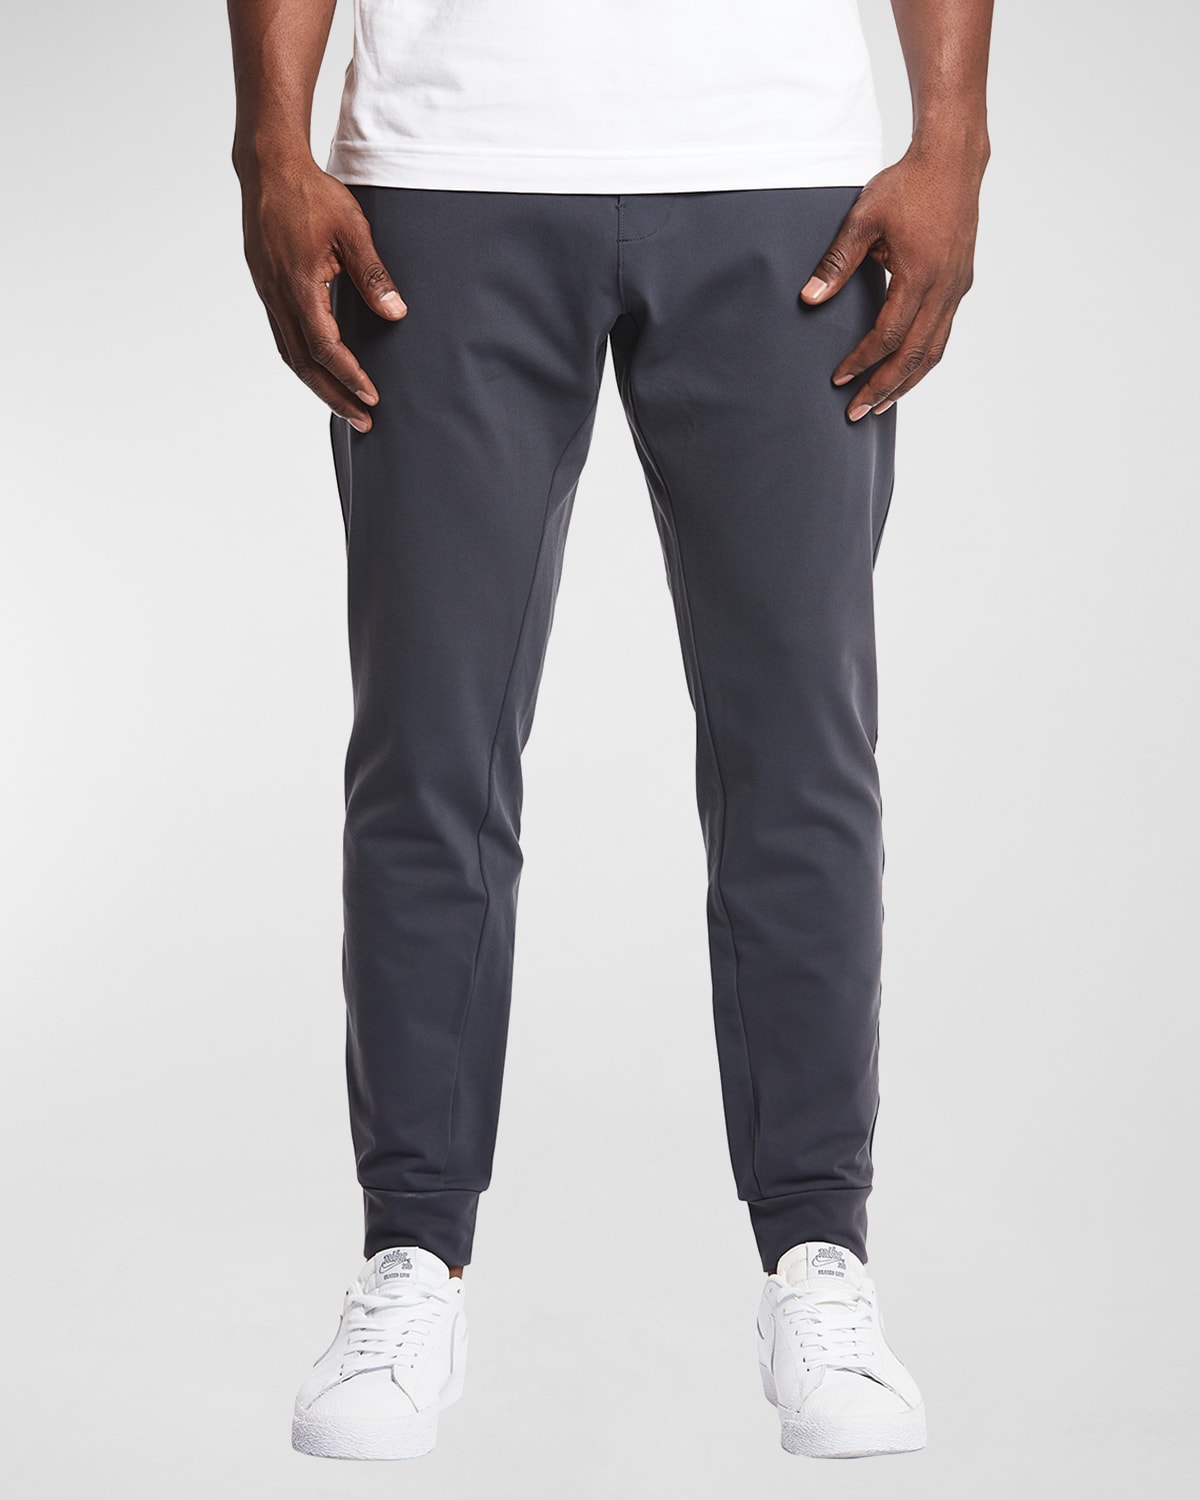 PUBLIC REC MEN'S ALL DAY EVERY DAY JOGGER PANTS,PROD242670014